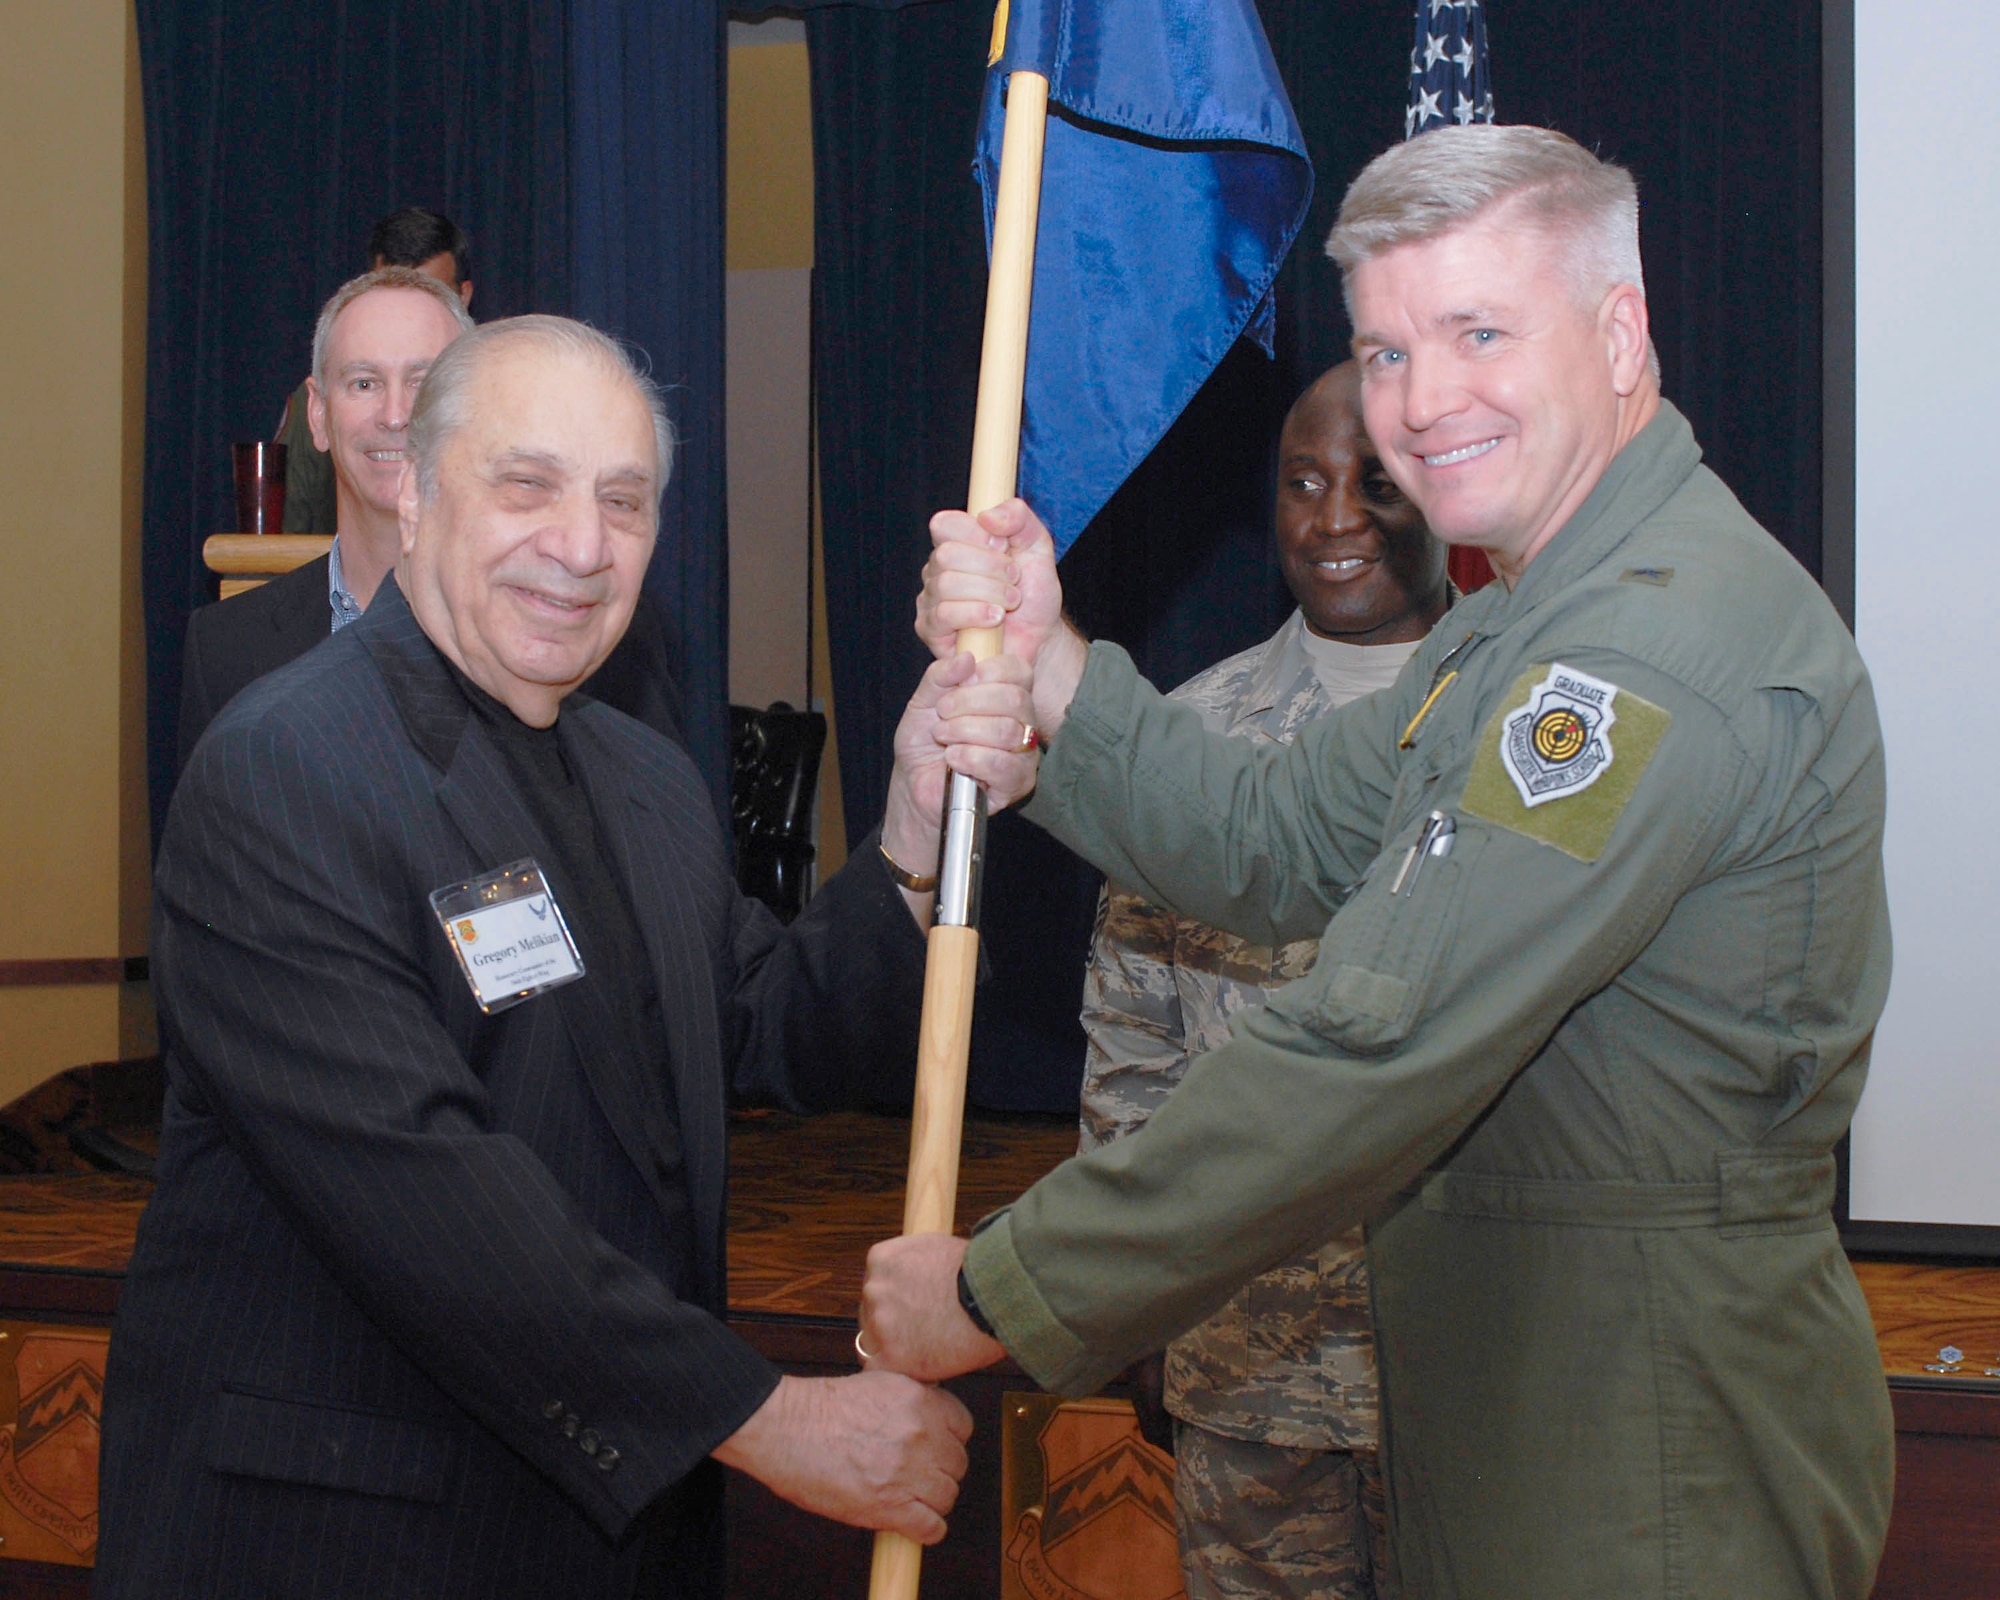 Brig. Gen. J.D. Harris, 56th Fighter Wing commander, poses for a photo with one of his honorary commanders, Gregory Melikian, a lawyer and founder of Great Western Realty Co.  Mr. Melikian holds two honorary commander assignments since he is also assigned to the 944th Fighter Wing commander.  (U.S. Air Force photo/Senior Airman Darlene Seltmann)